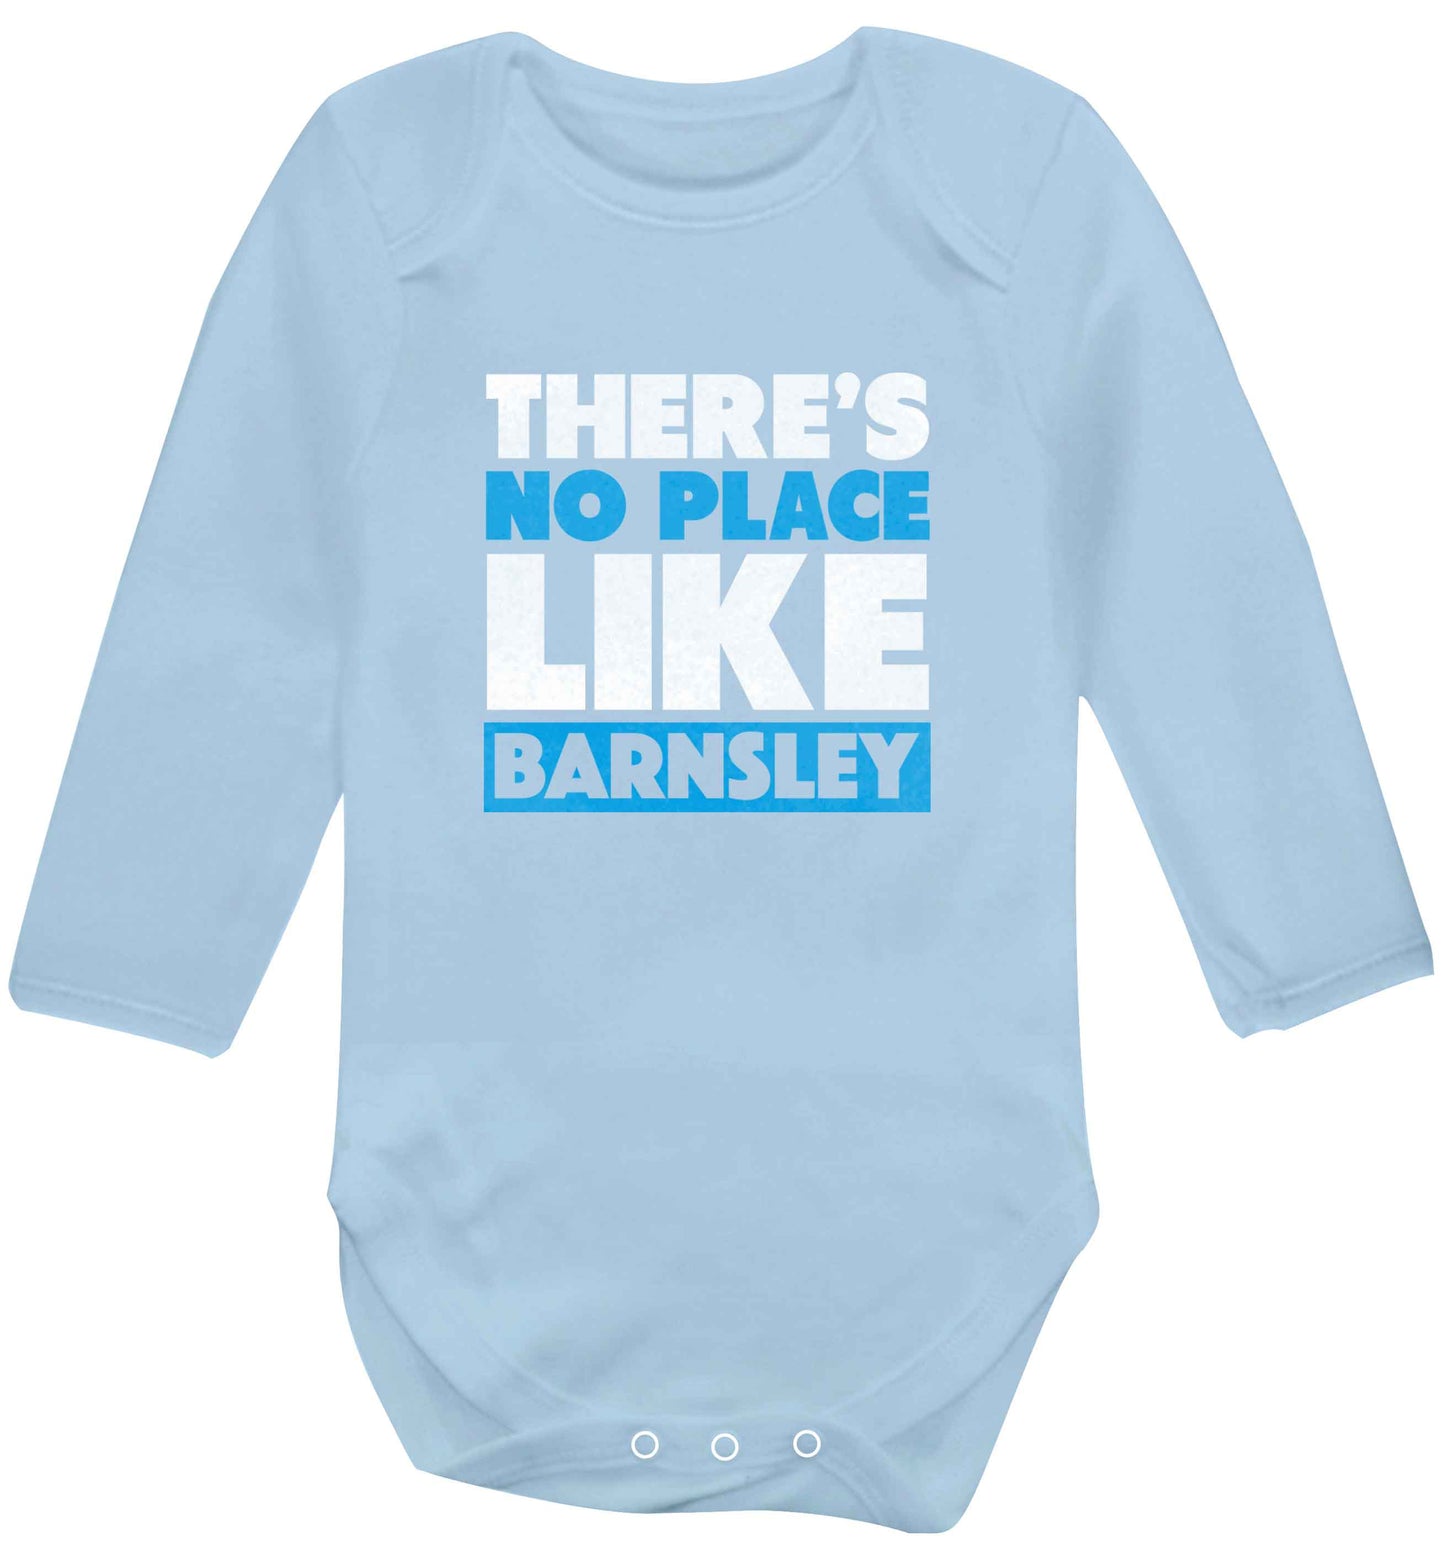 There's No Place Like Barnsley baby vest long sleeved pale blue 6-12 months